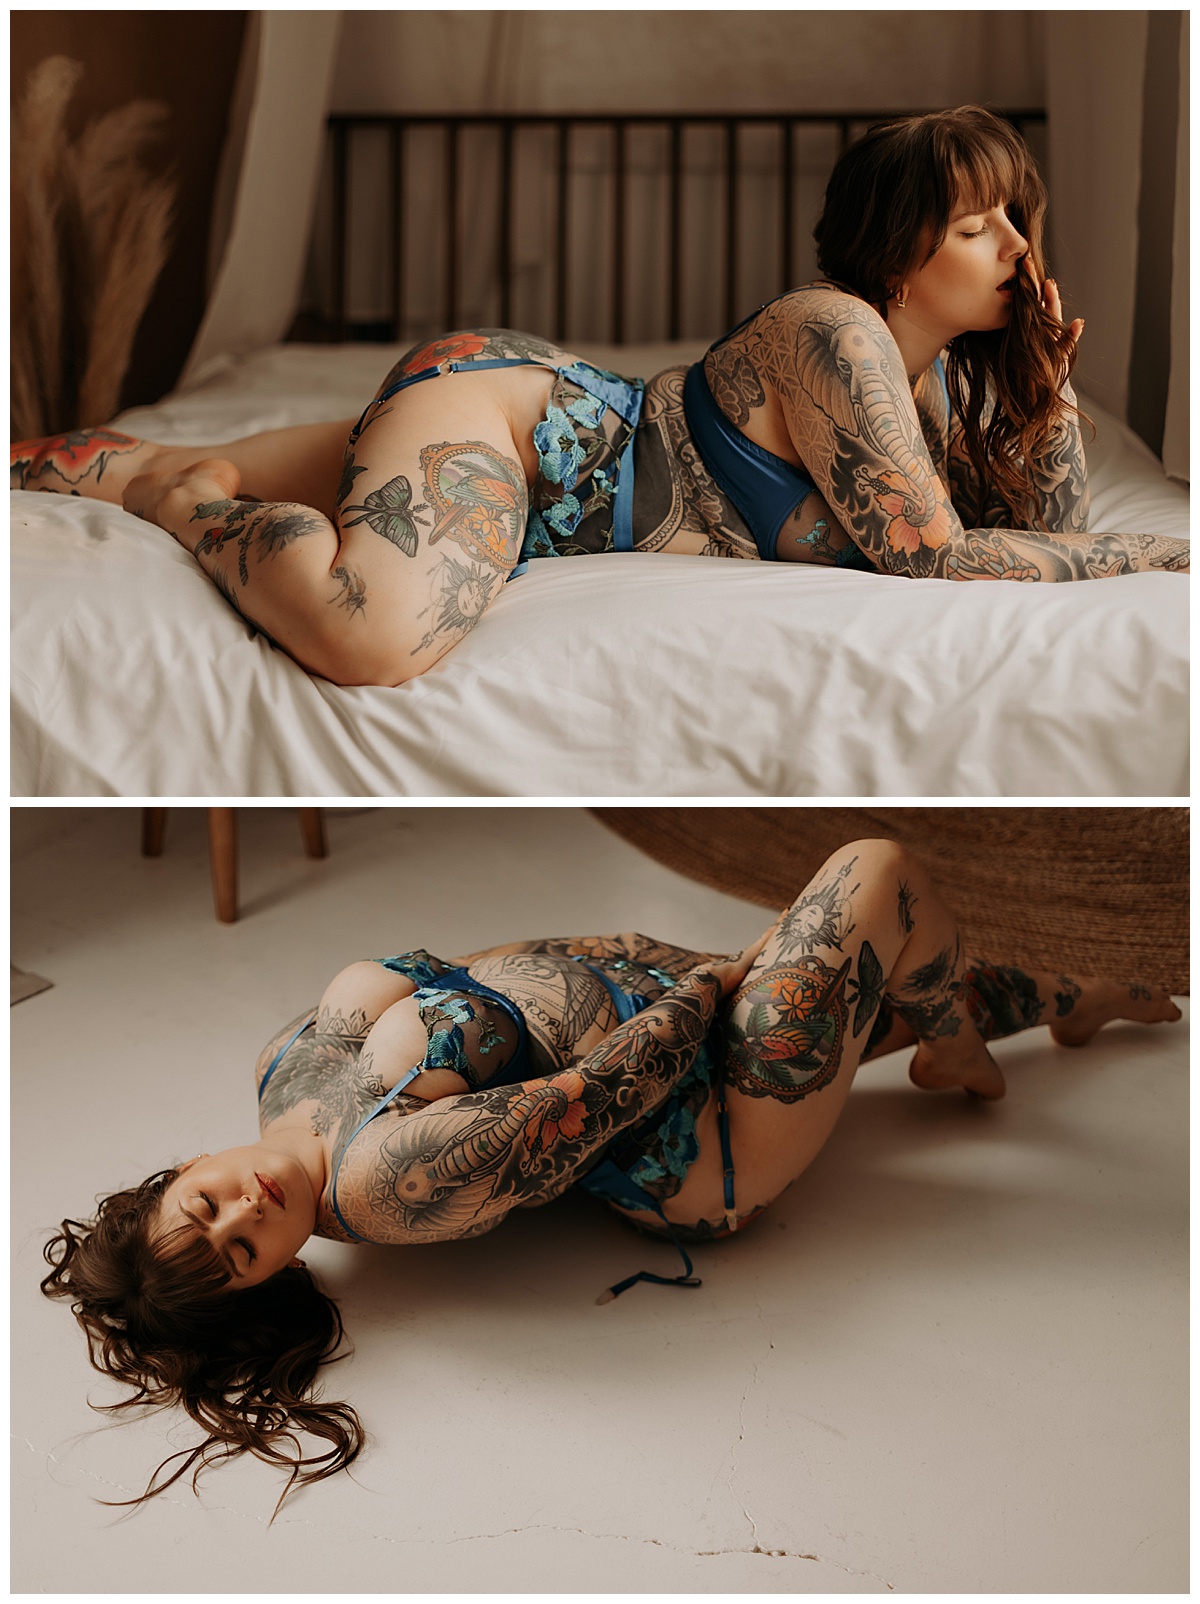 Adult lays on the bed and floor wearing blue lingerie for Minneapolis Boudoir Photographer